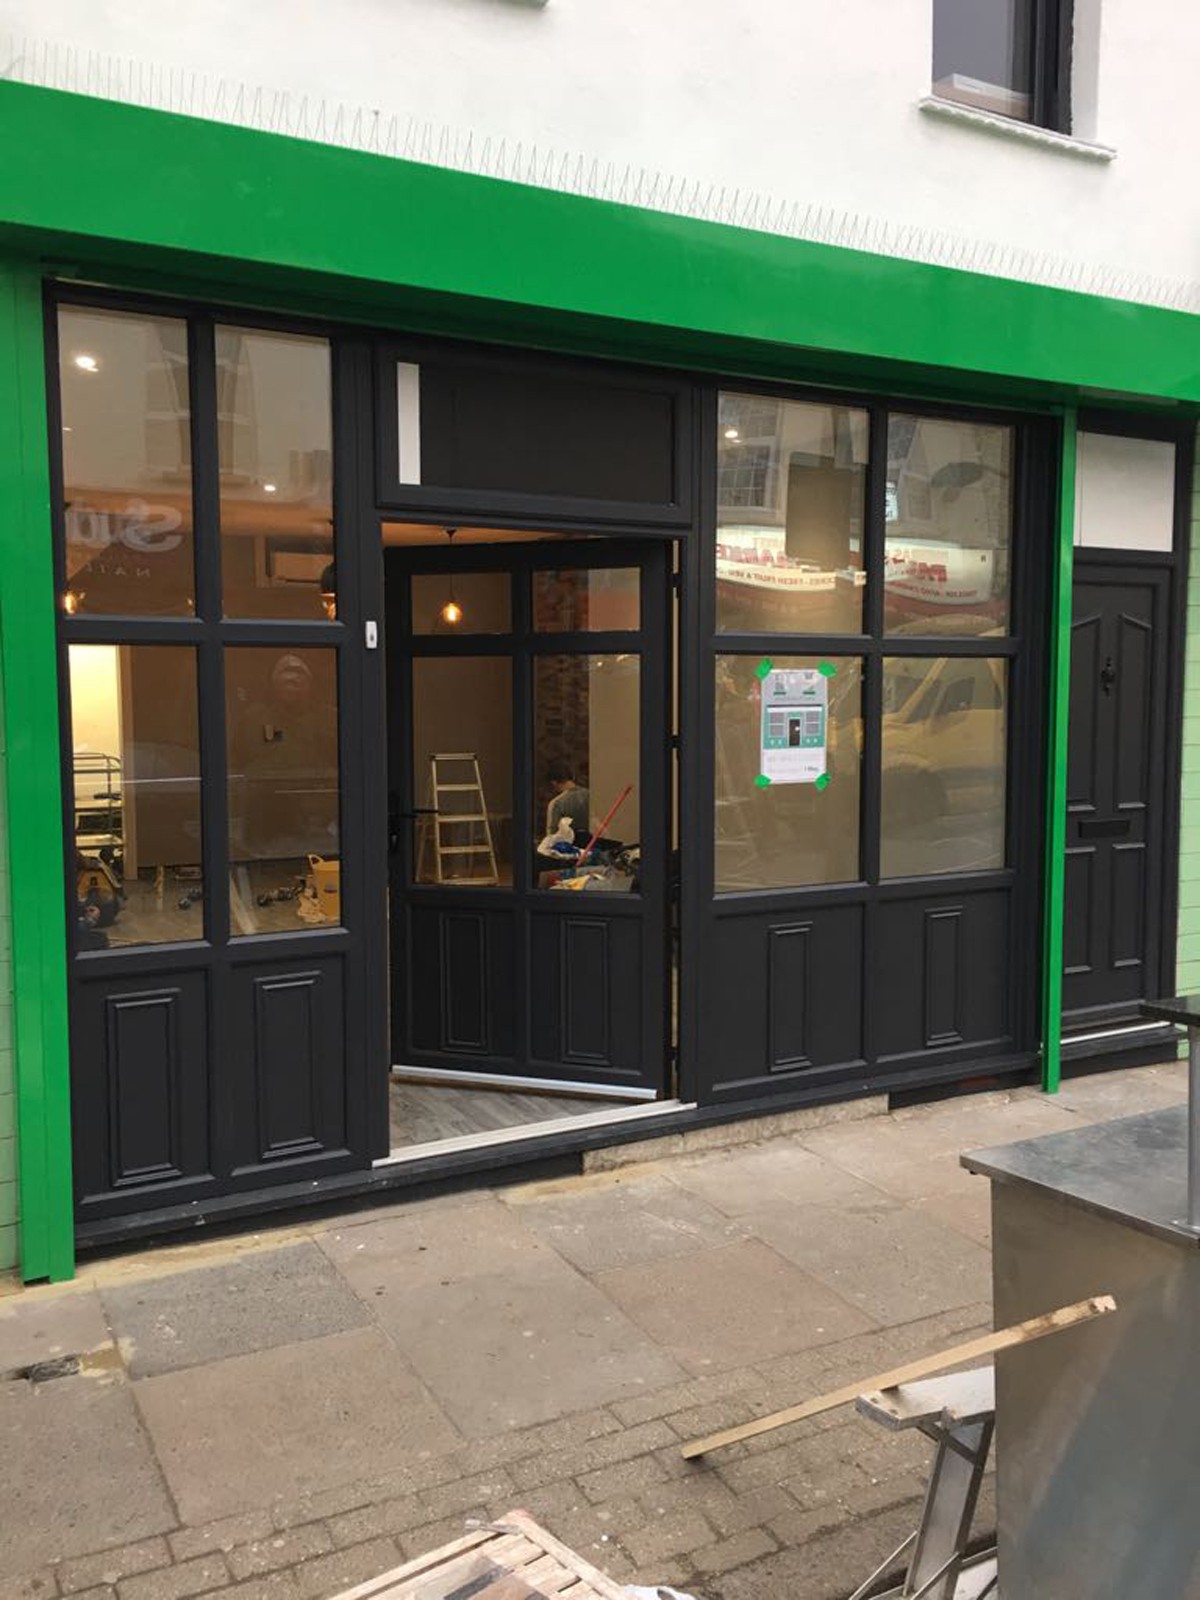 Harringtons Pie and Mash shop in Tooting gets new windows